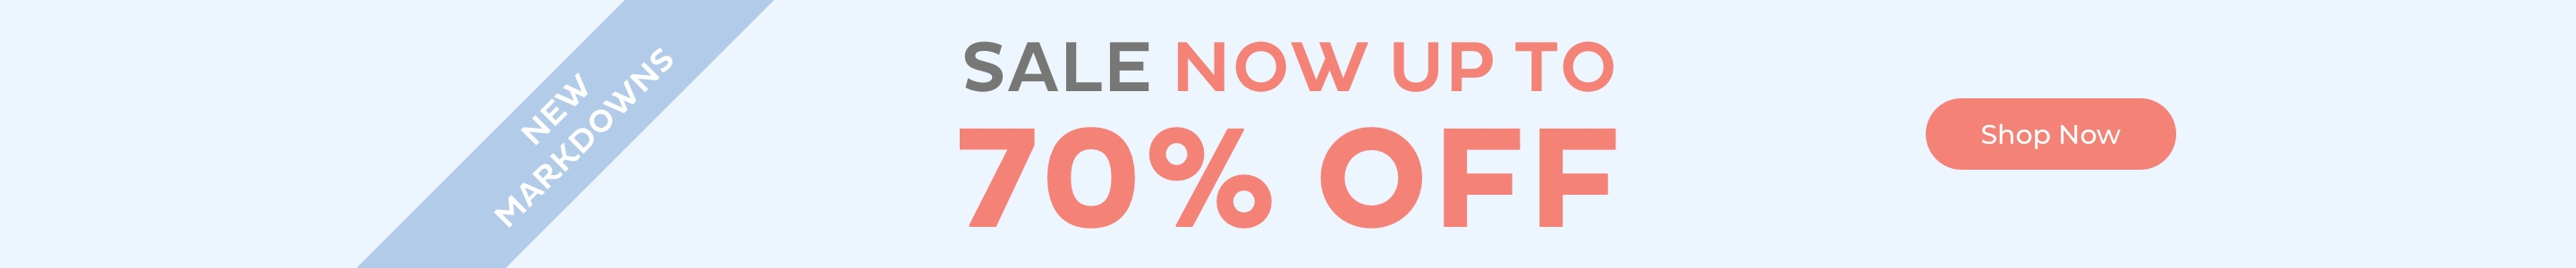 Sale Up to 70% Off